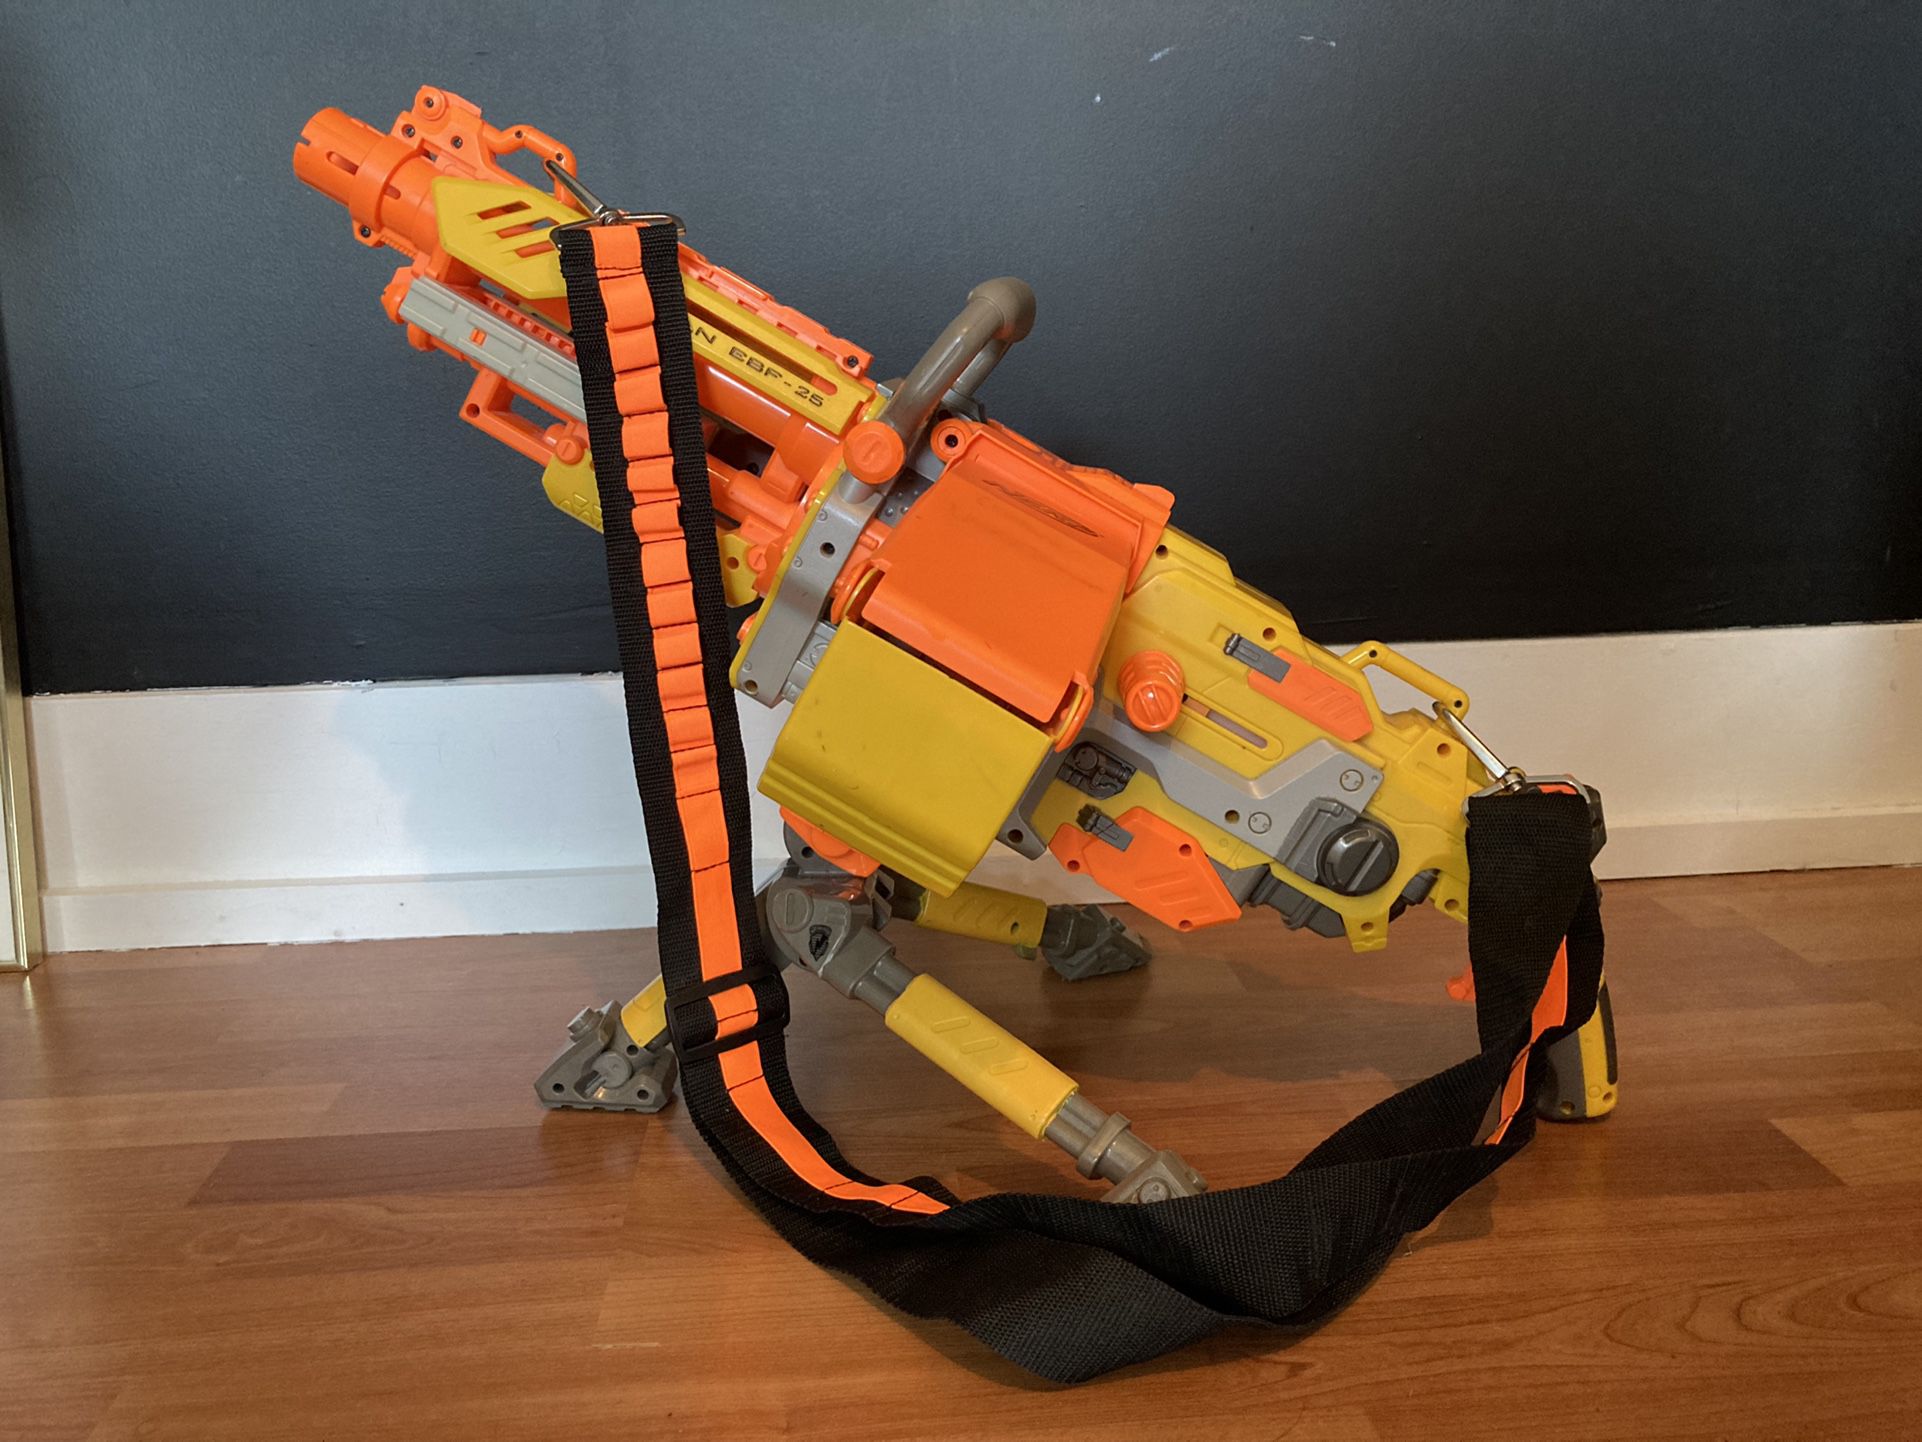 Nerf N-Strike EBF-25 Dart Blaster With Attachments Tested Sale in Georgia, VT - OfferUp